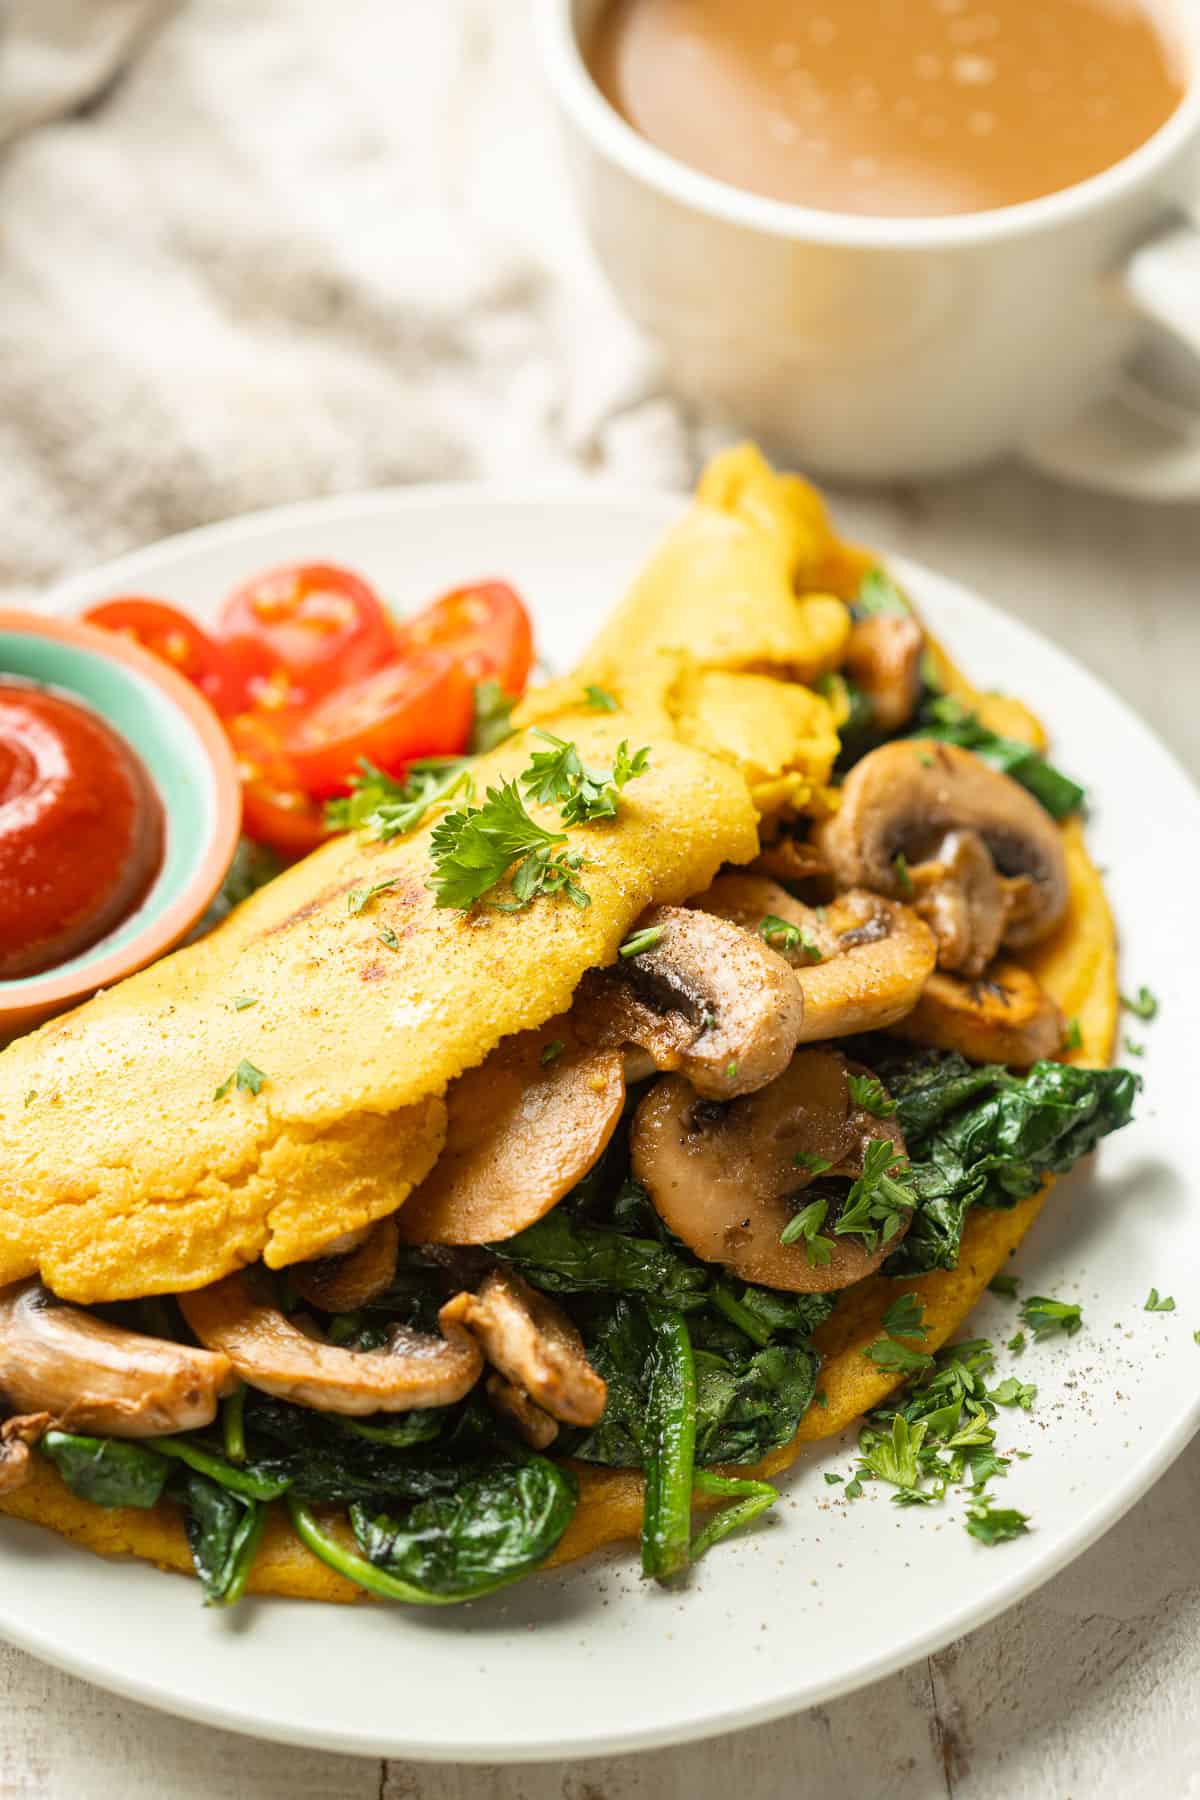 Vegan Omelet stuffed with mushrooms and spinach on a dish with coffee cup in the background.